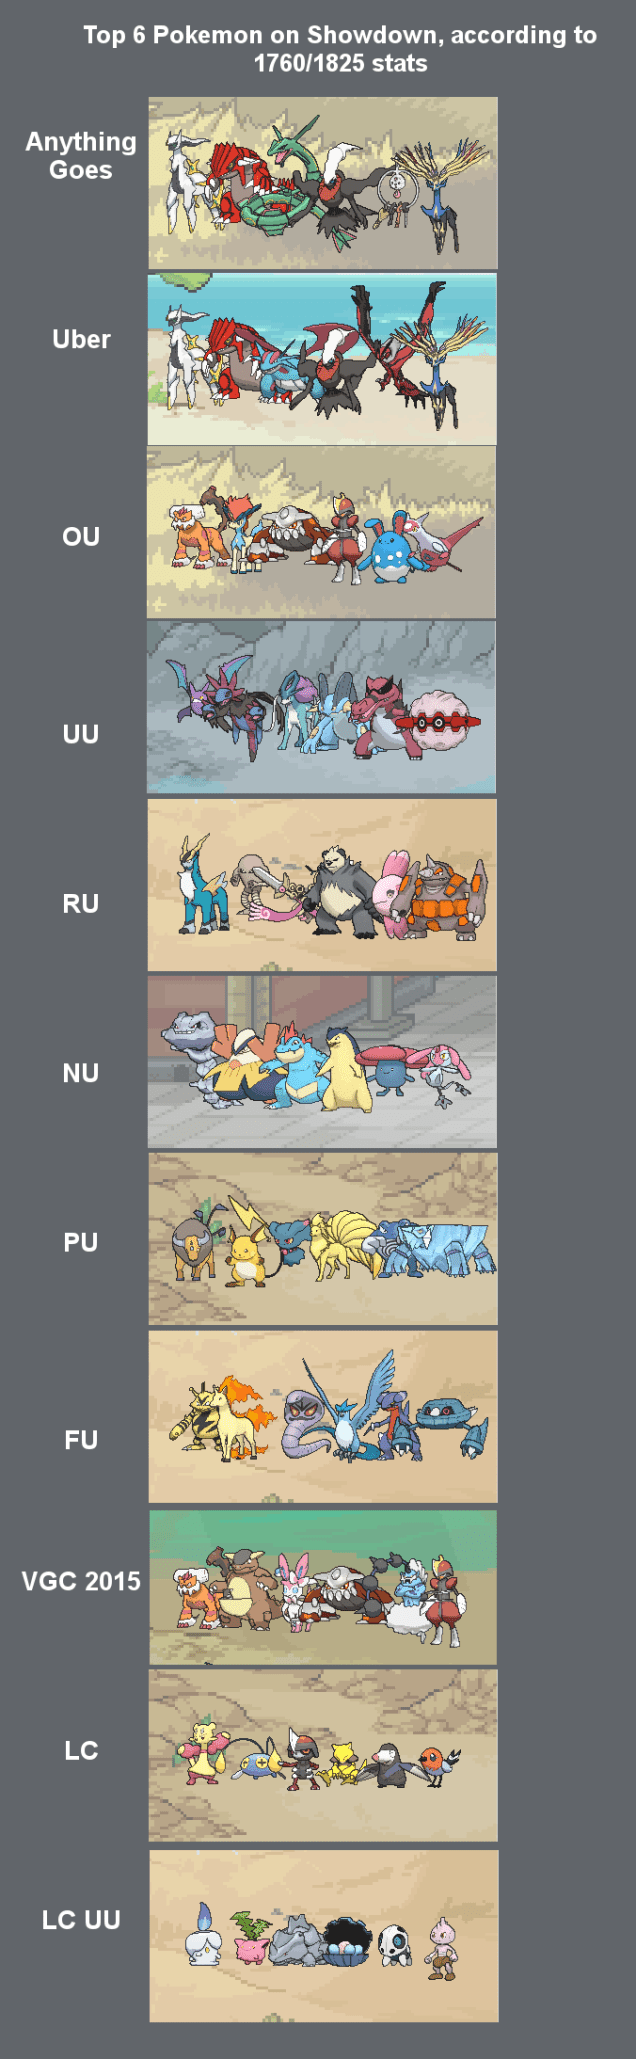 The Best Pokémon For Each Situation